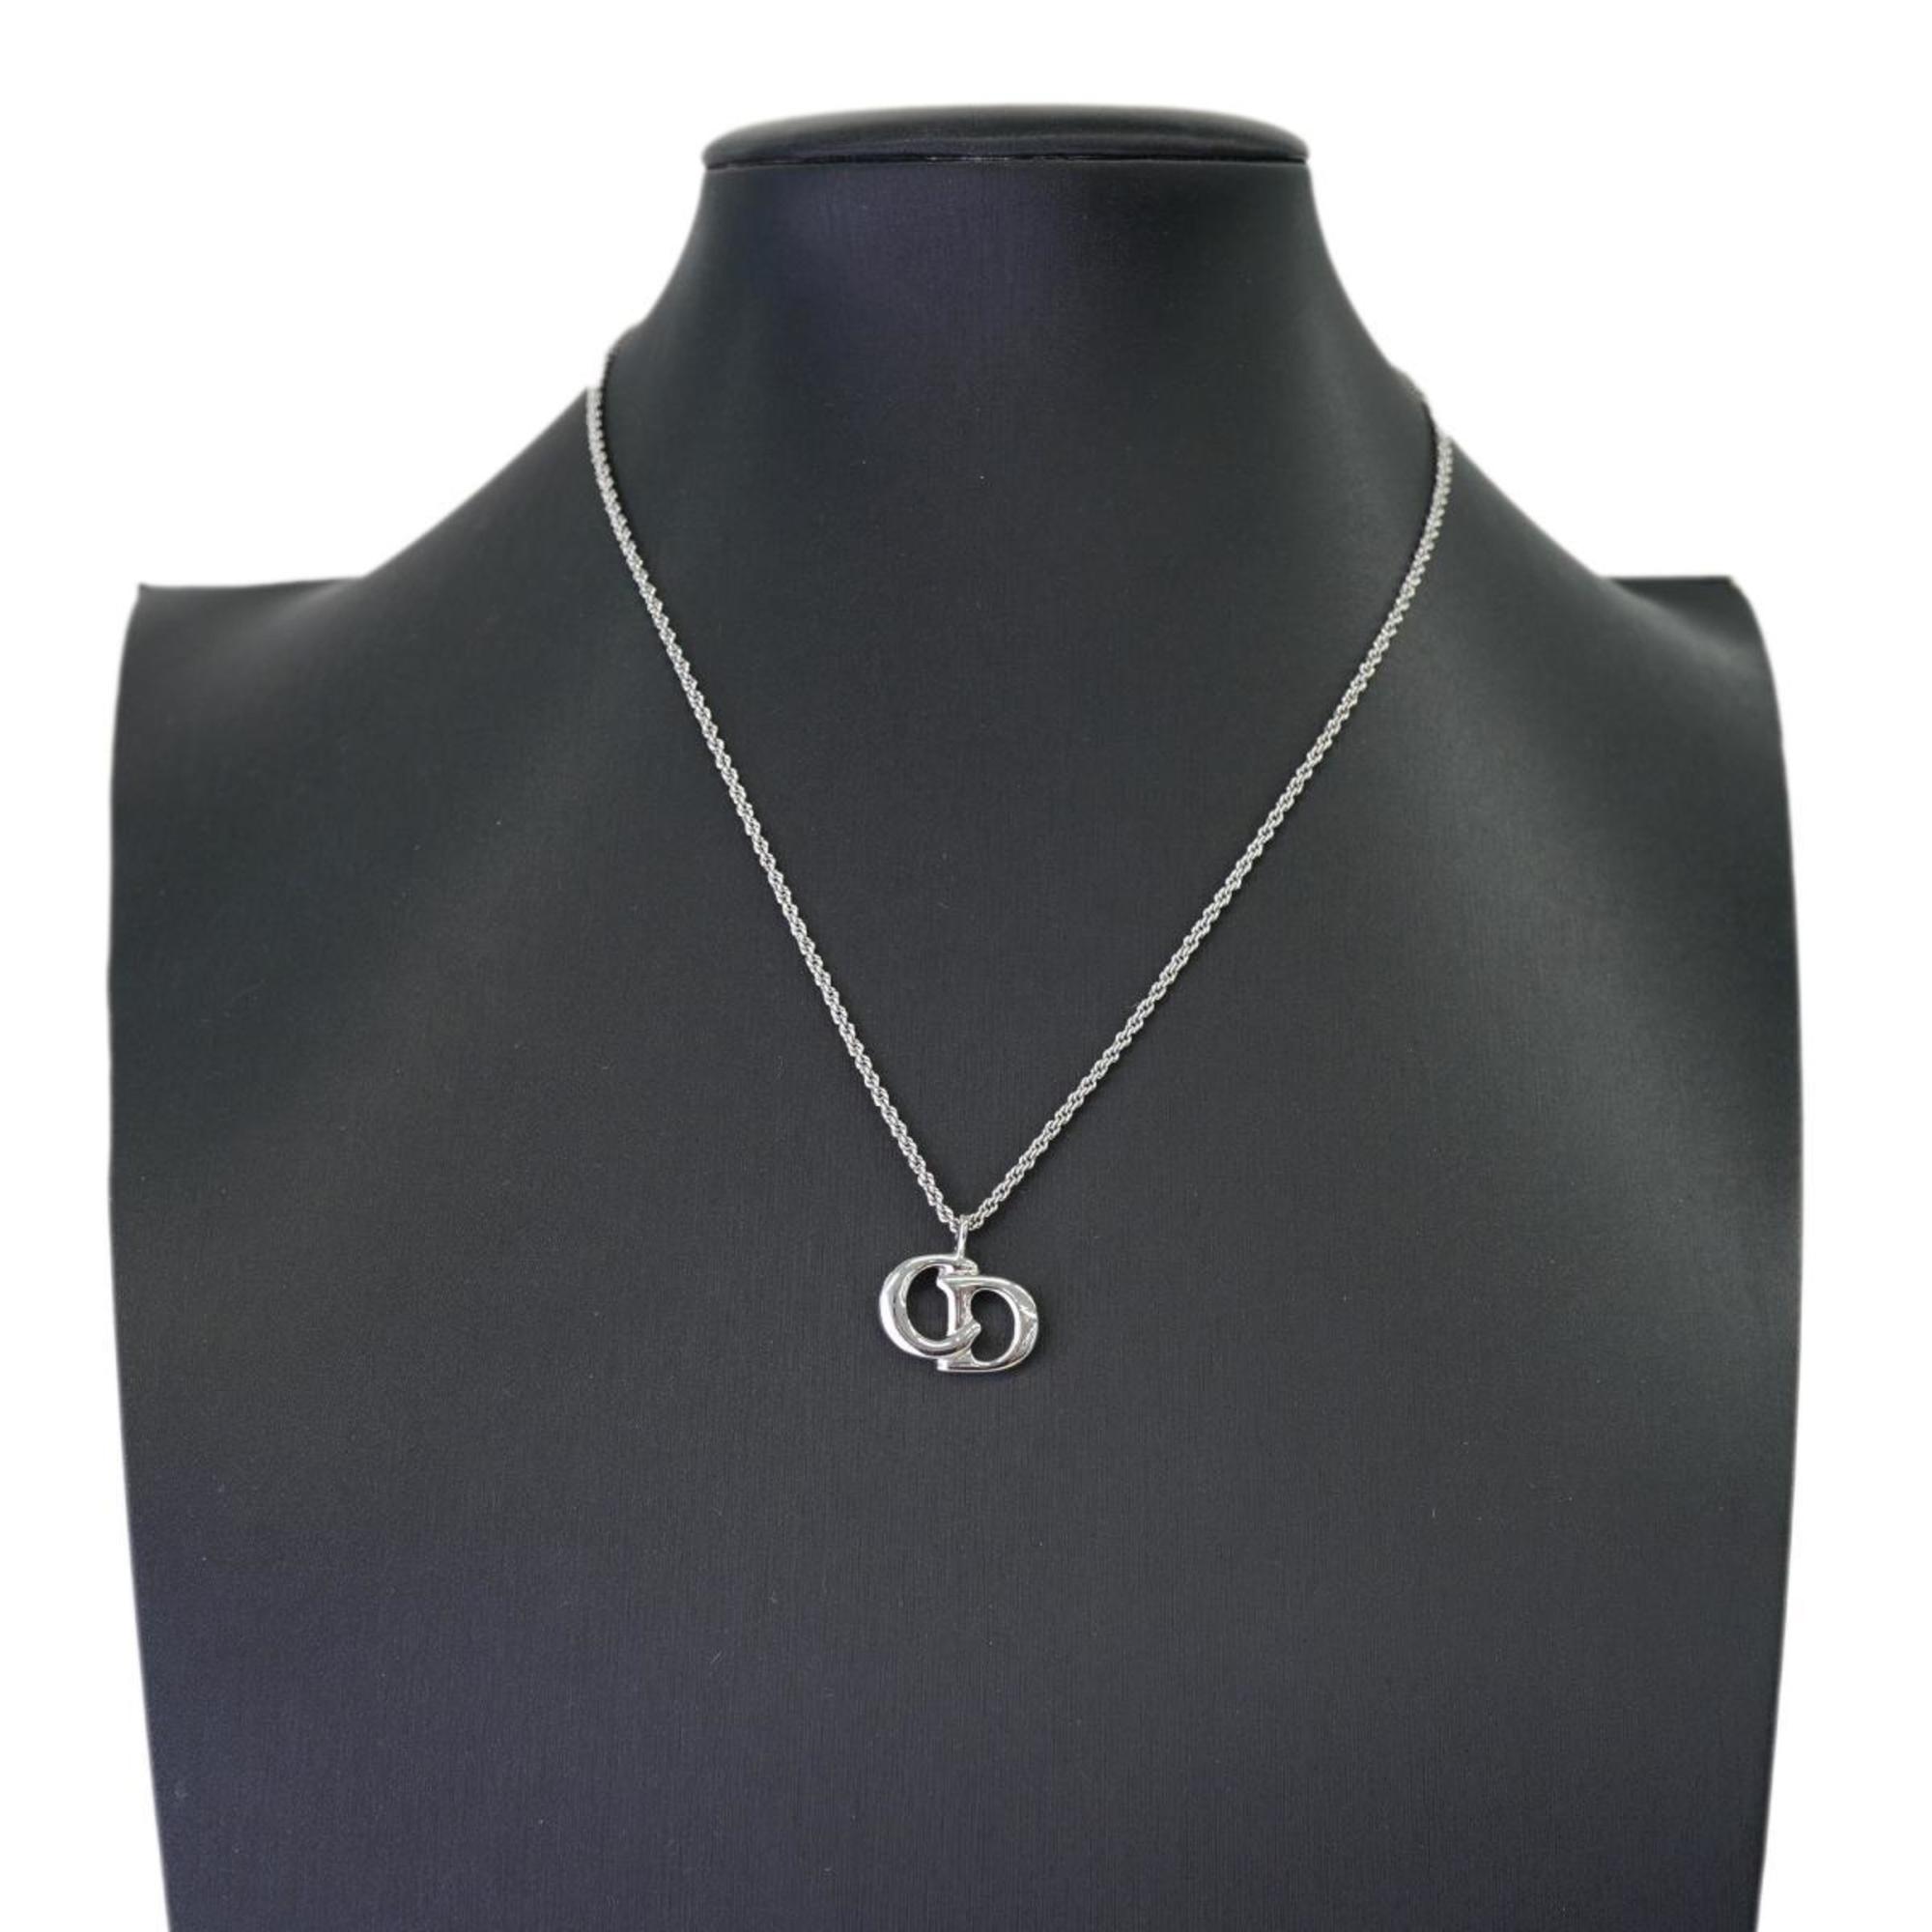 Christian Dior Necklace CD Metal Silver Women's